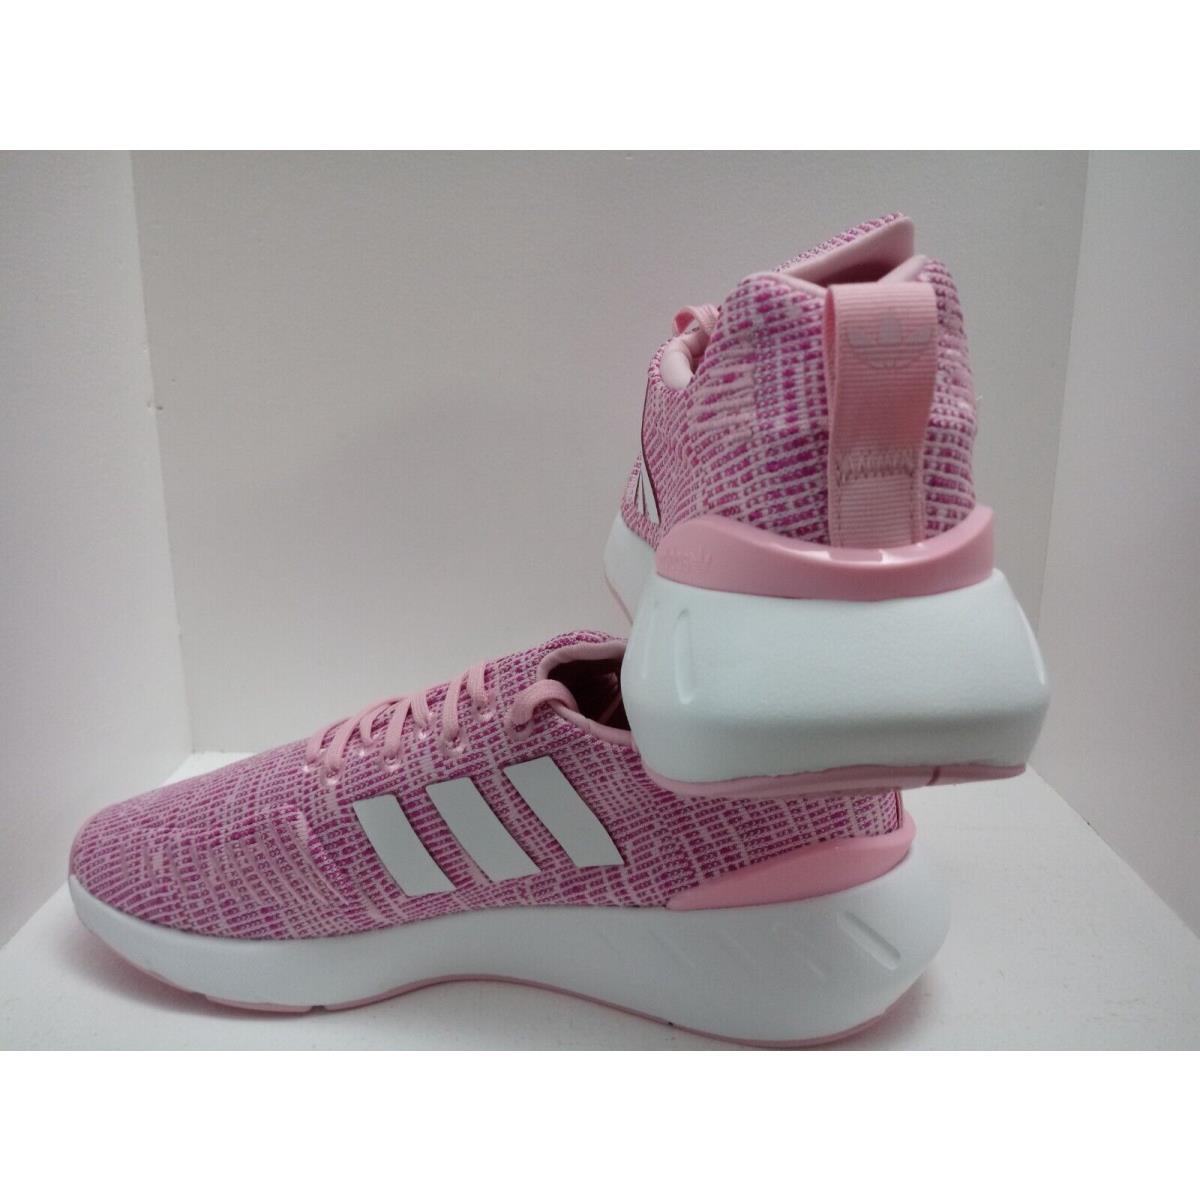 Adidas shoes  - PINK/WHITE 9